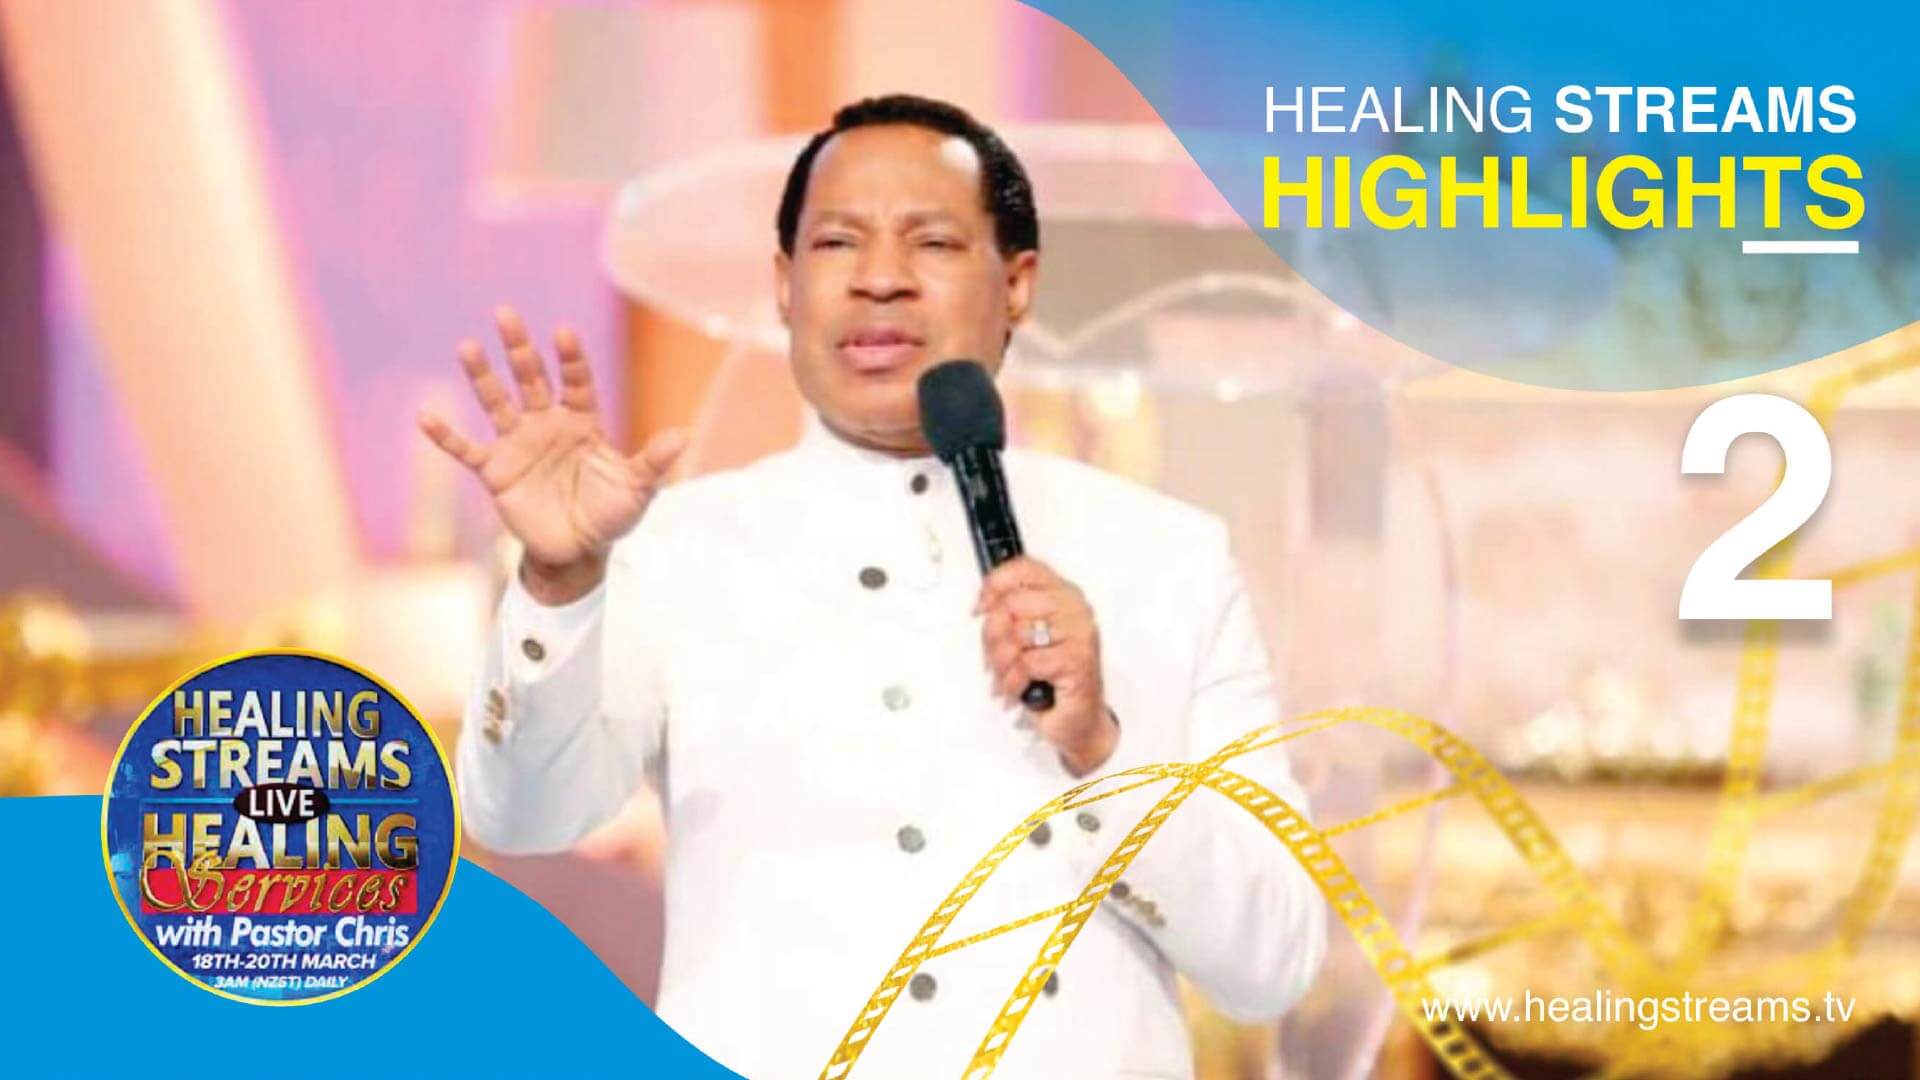 HEALING STREAMS LIVE HEALING SERVICES HIGHLIGHTS 2